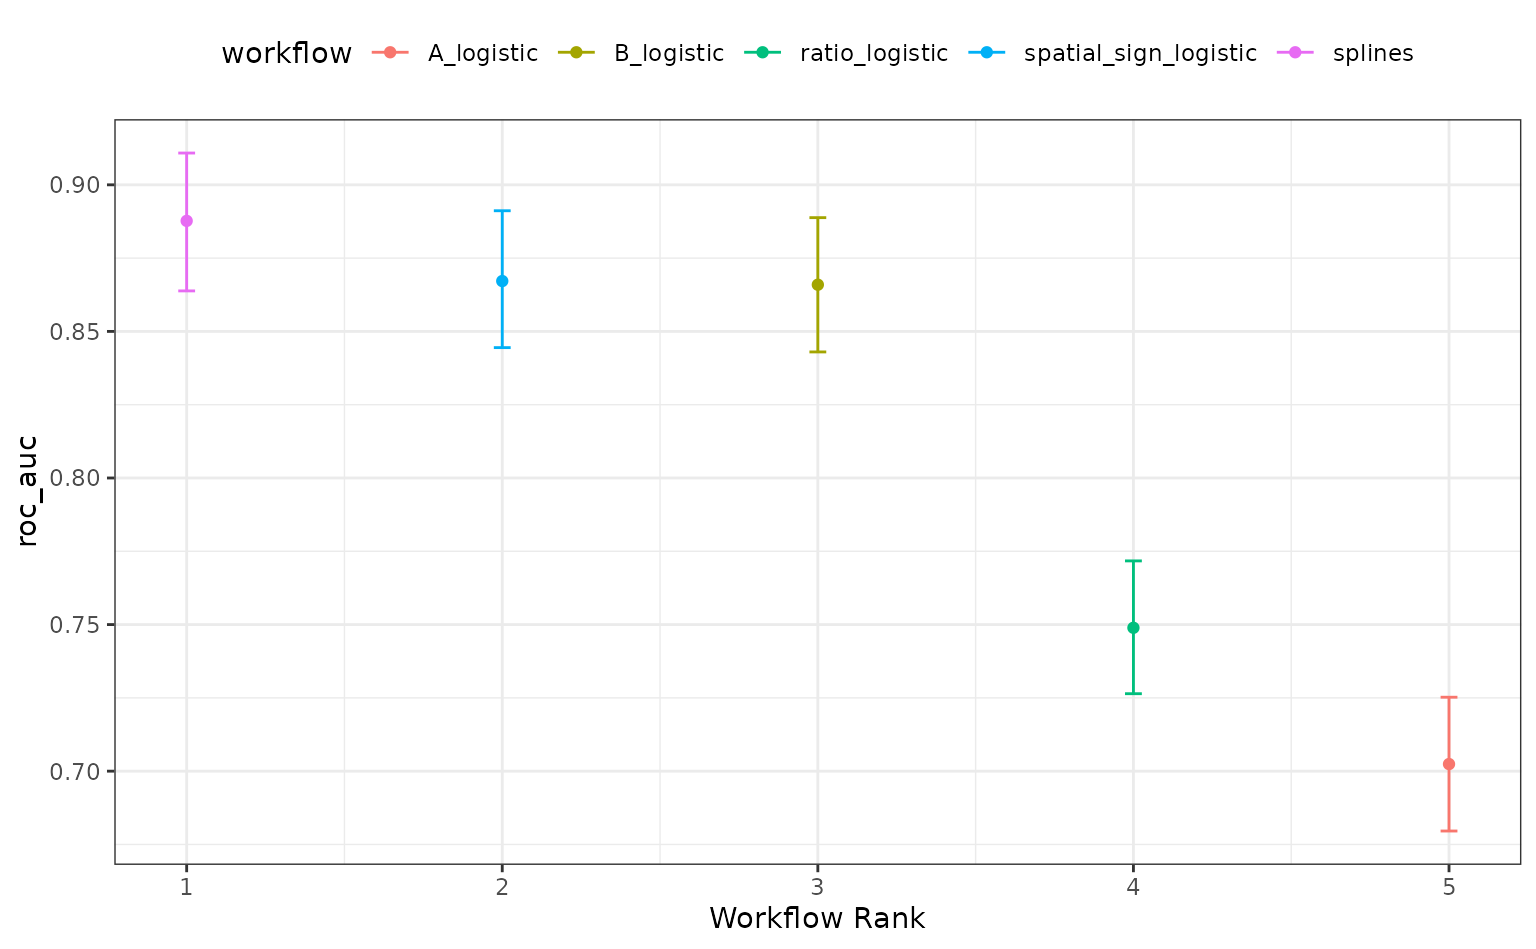 Error-bar chart. The x-axis is the workflow rank in the set (a value of one being the best) versus the performance metric(s) on the y-axis. splines is doing the best with a mean around 0.885, spatial_sign_logistic and B_logistic both have a mean around 0.87. The error bars makes it so these 3 models are within each others. ratio_logisitc has a mean of 0.75 and A_logistic has a mean around 0.70.